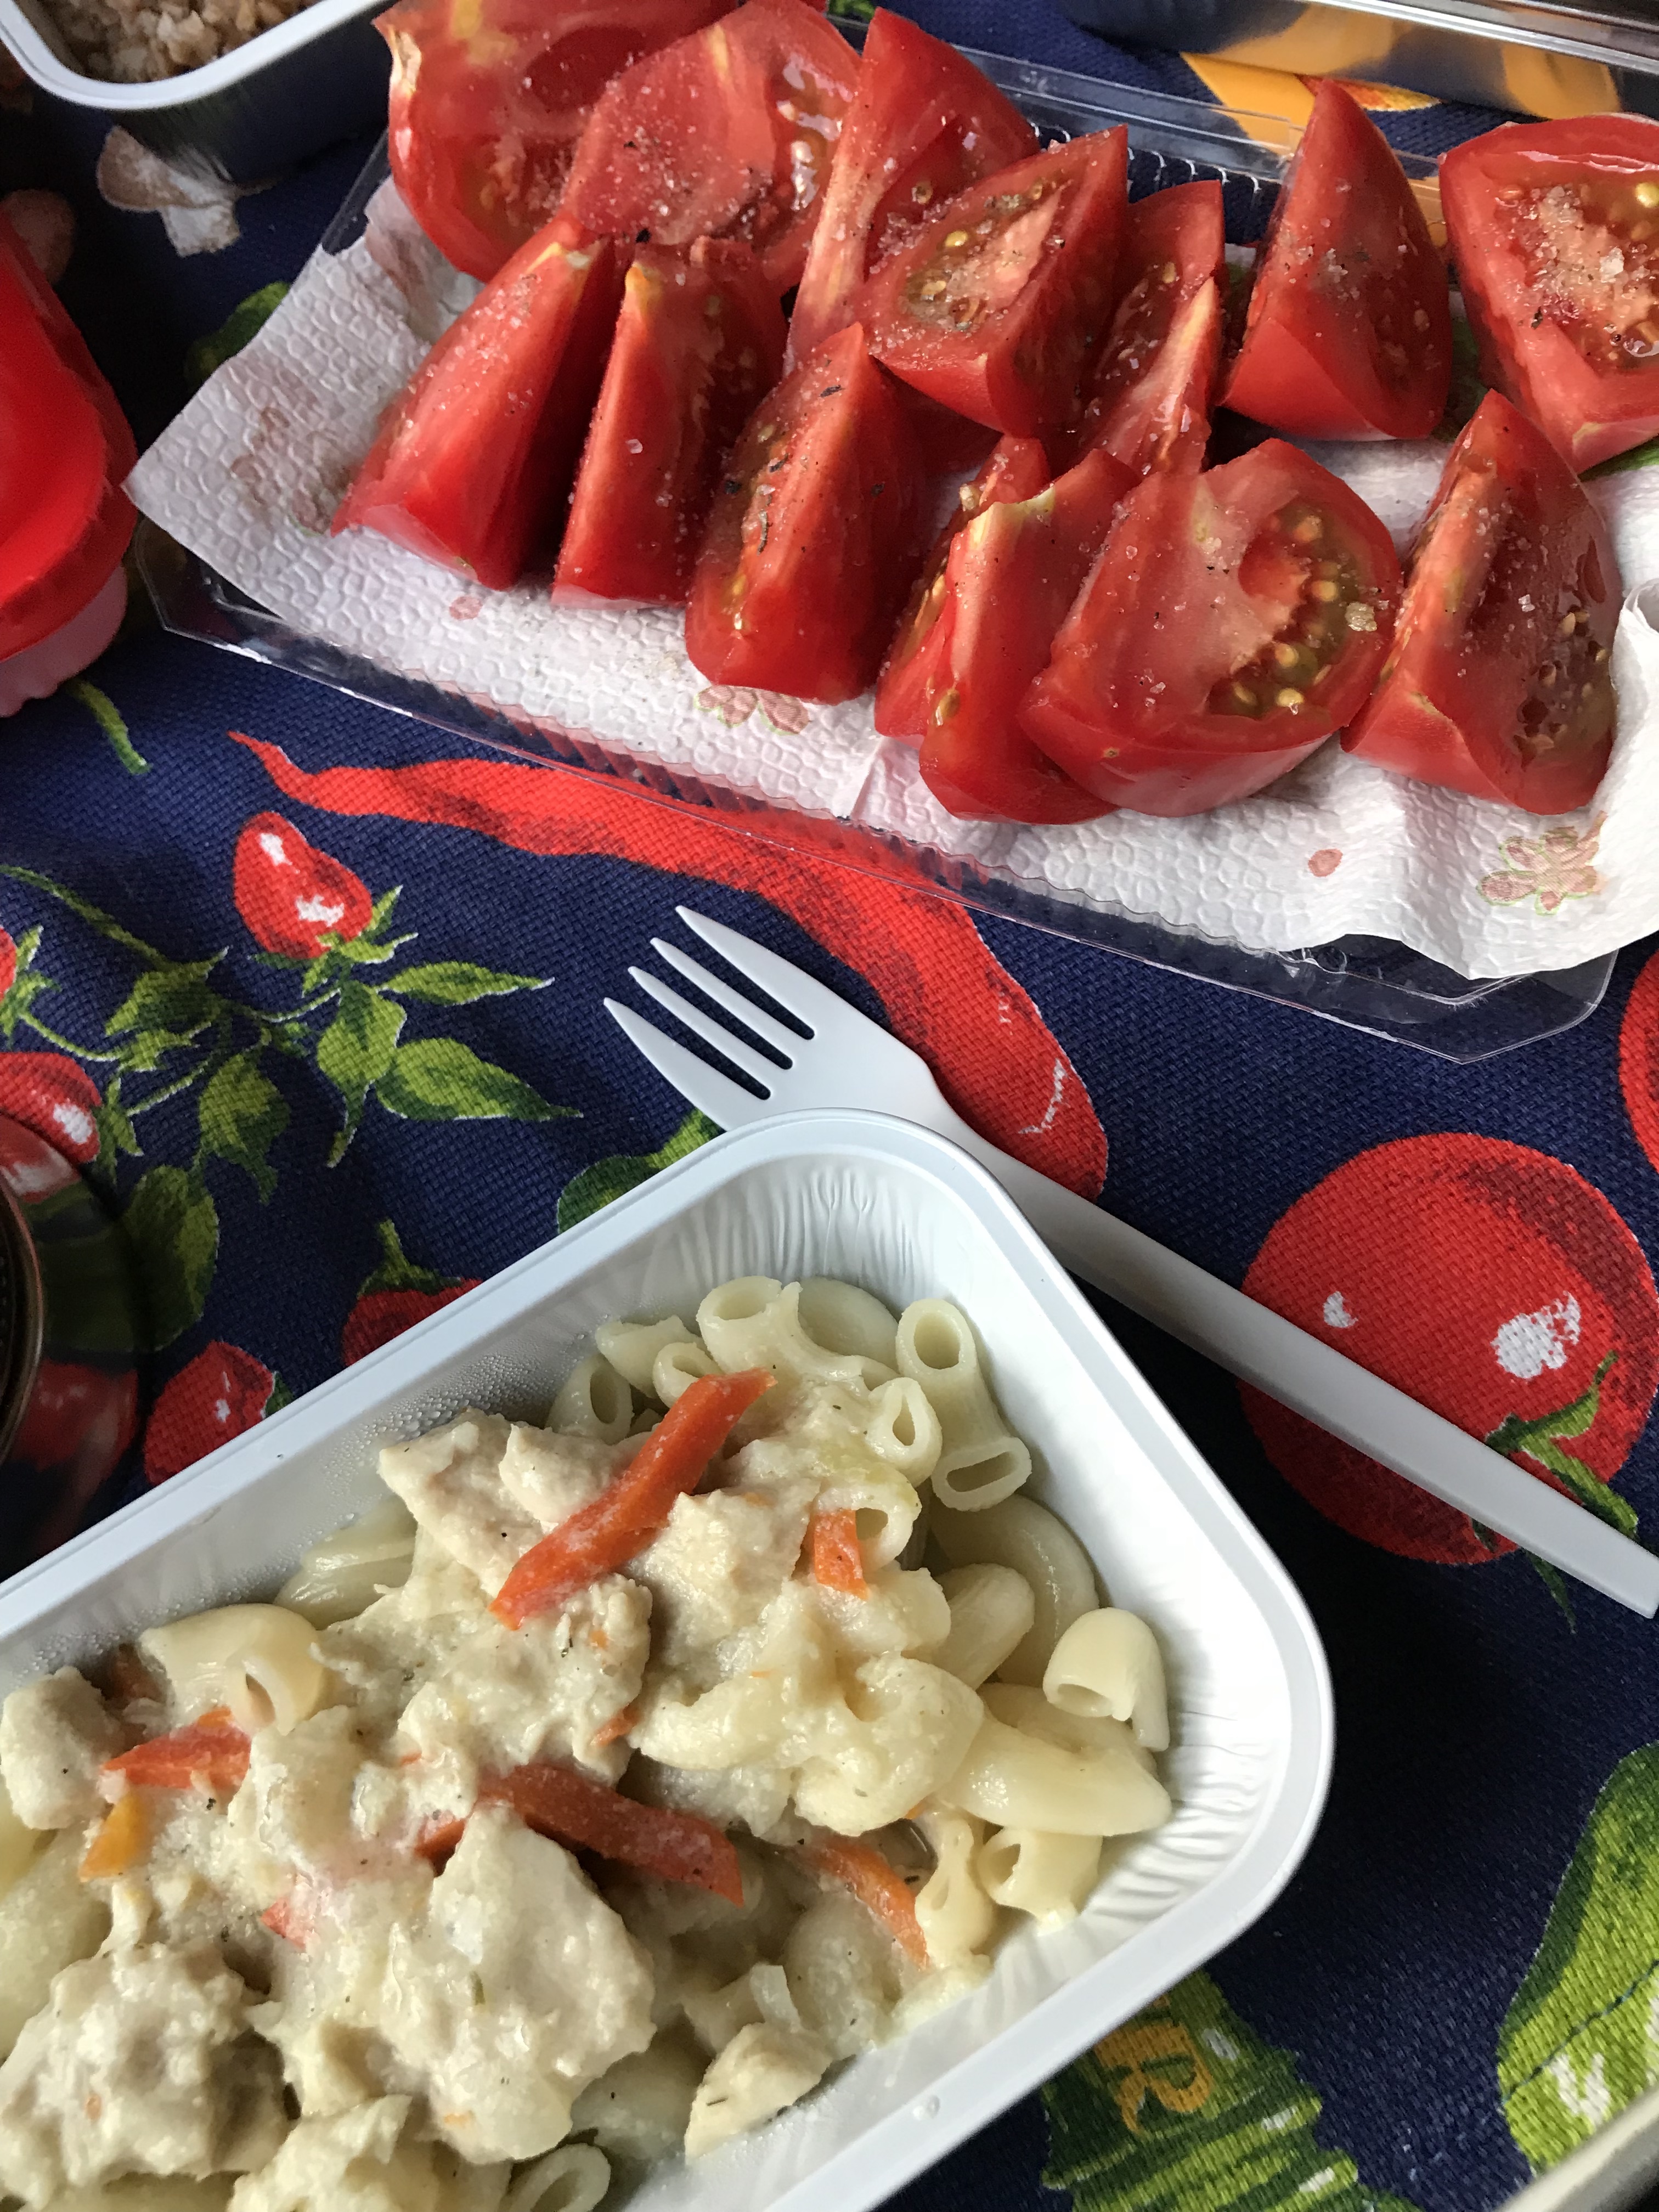 Train-provided meal supplemented by fresh tomatoes brought from home and shared with others.